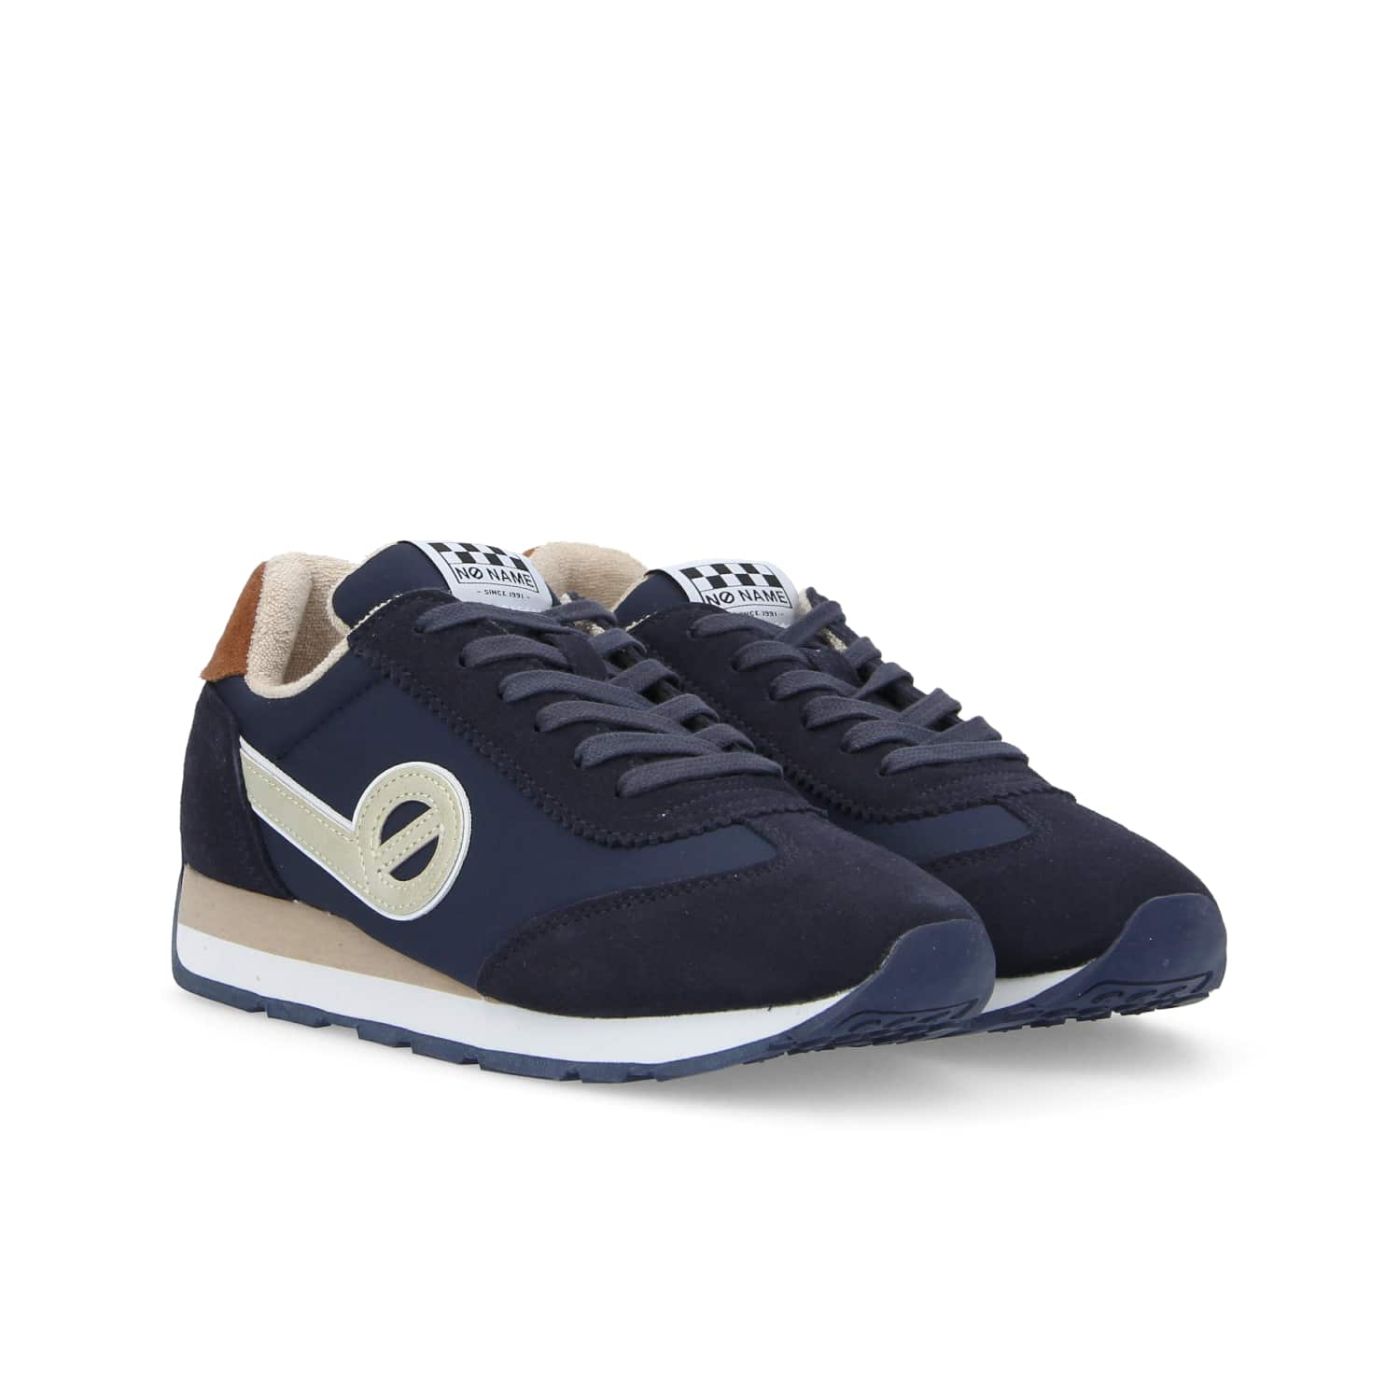 CITY RUN JOGGER - SUEDE/SQUARE - NAVY/NAVY